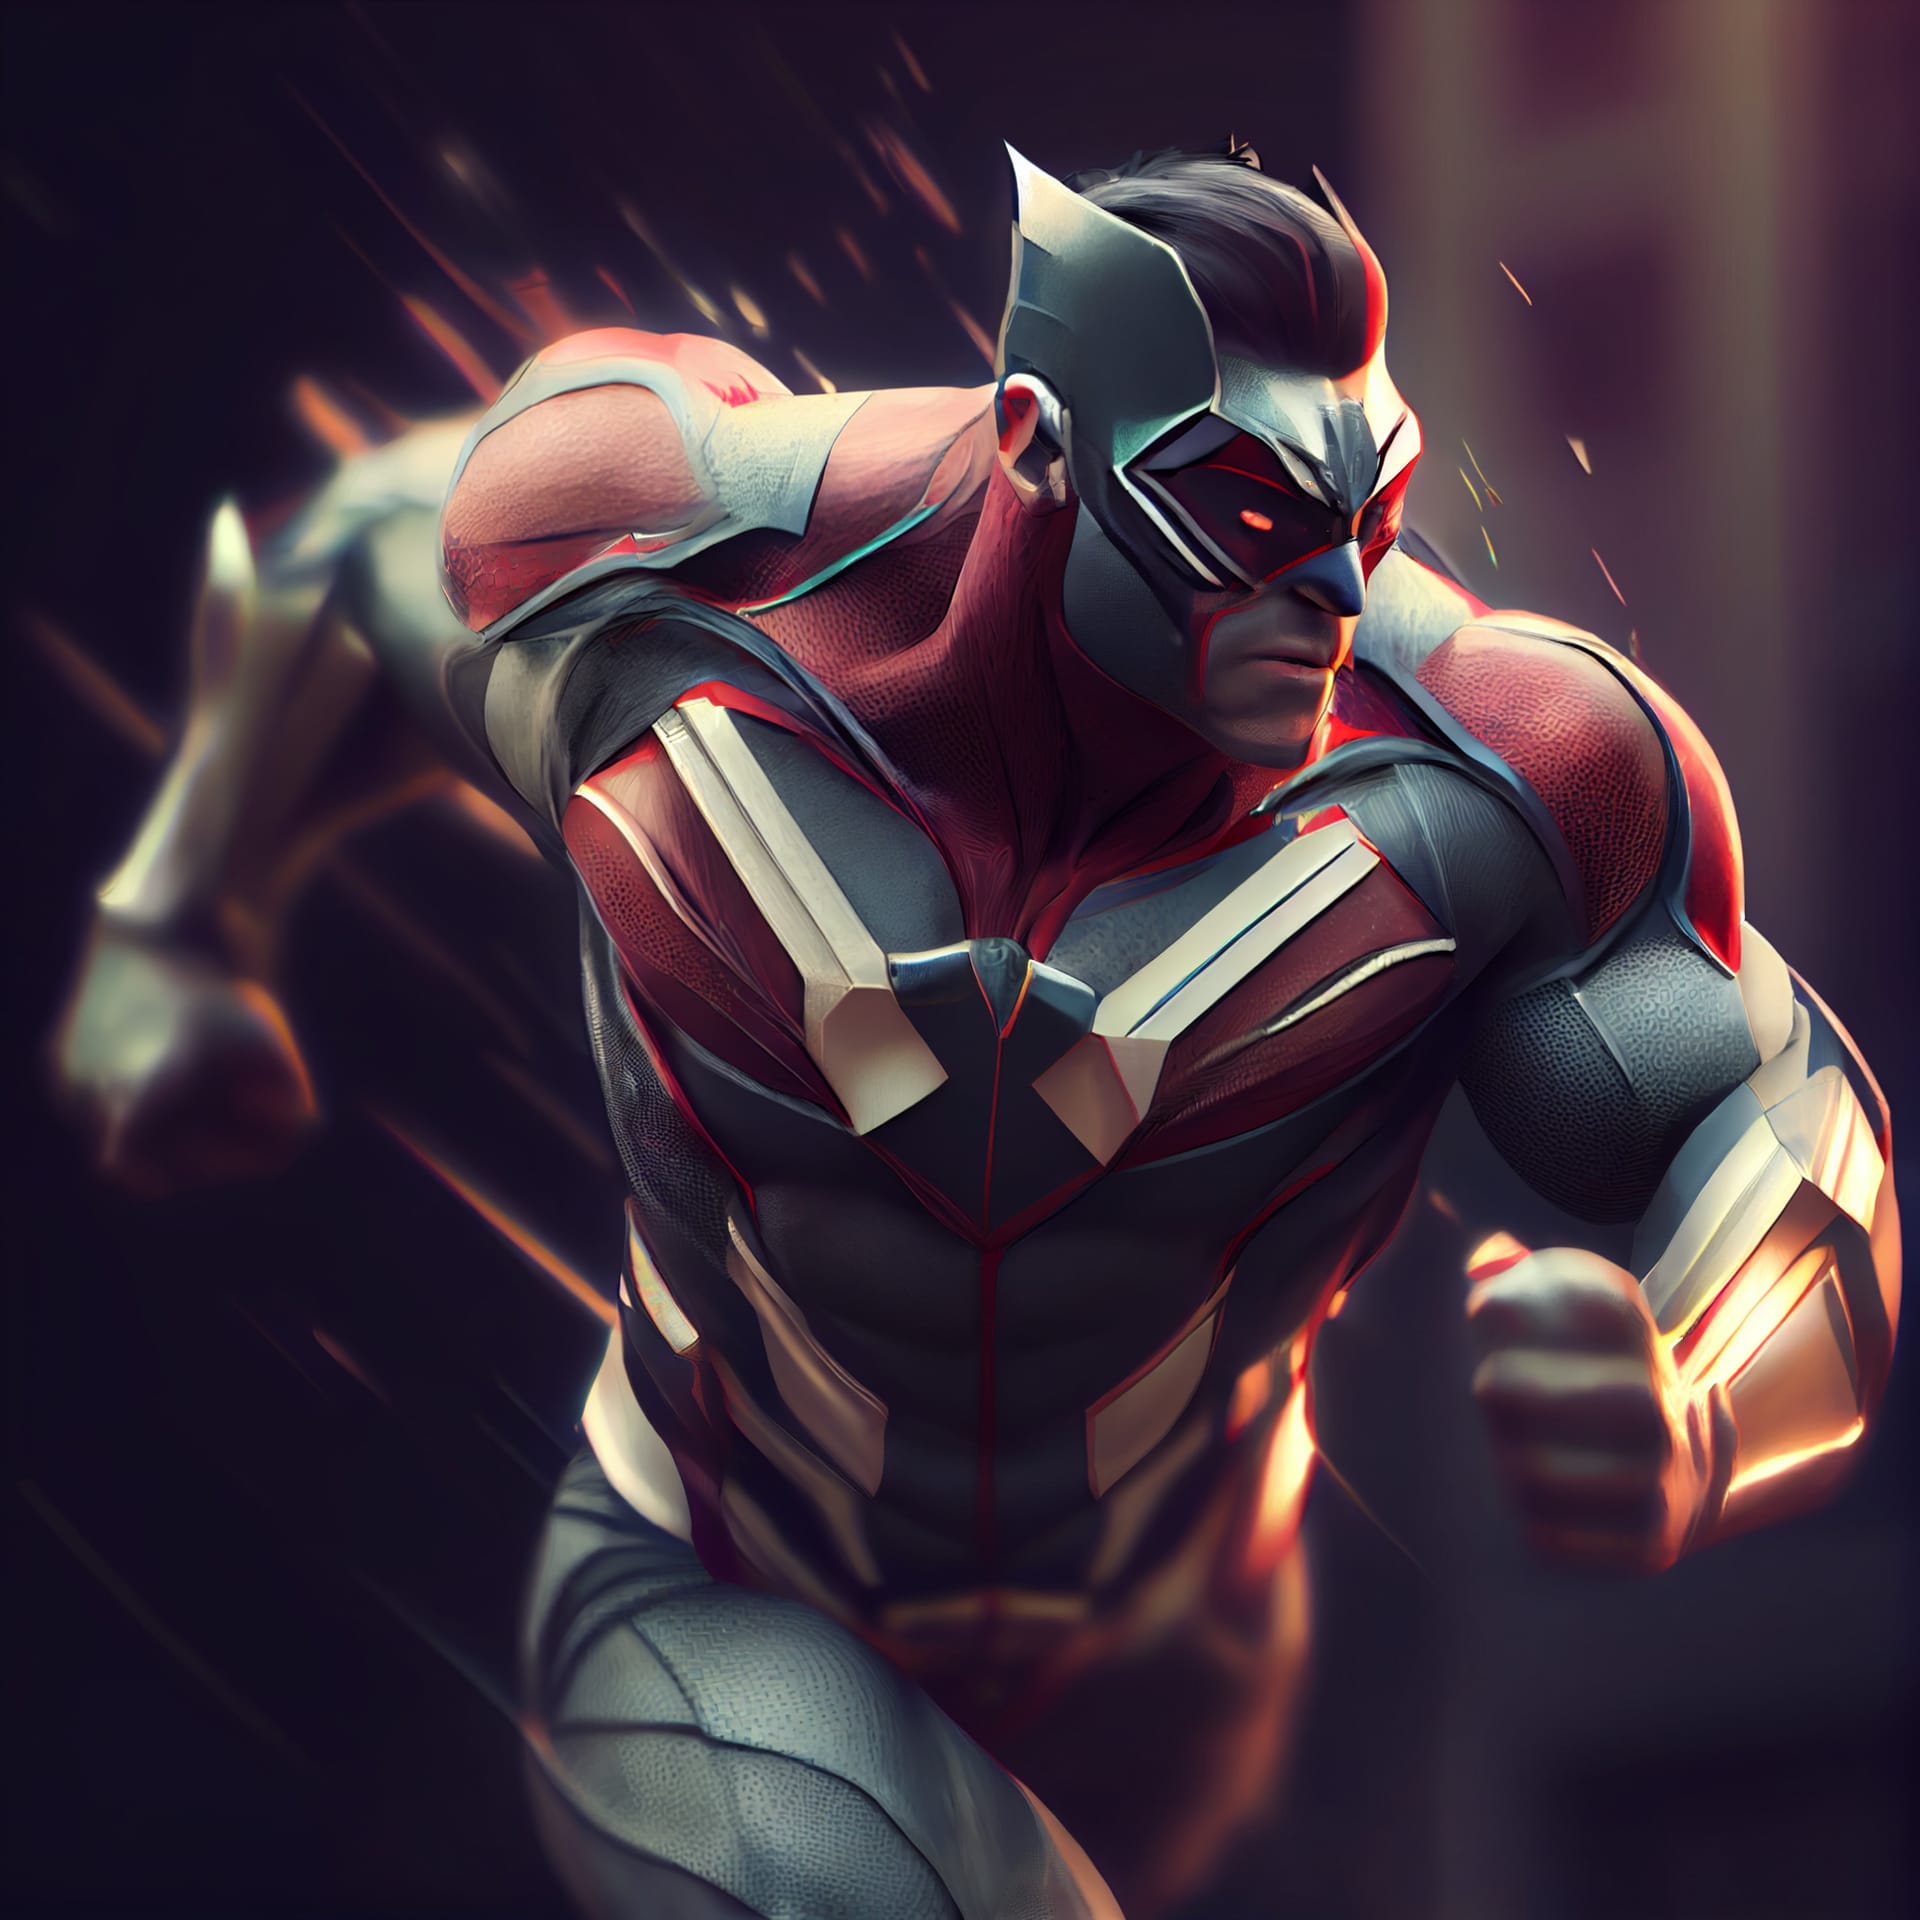 Profile avatar realistic superhero man with superpowers 3d render illustration image